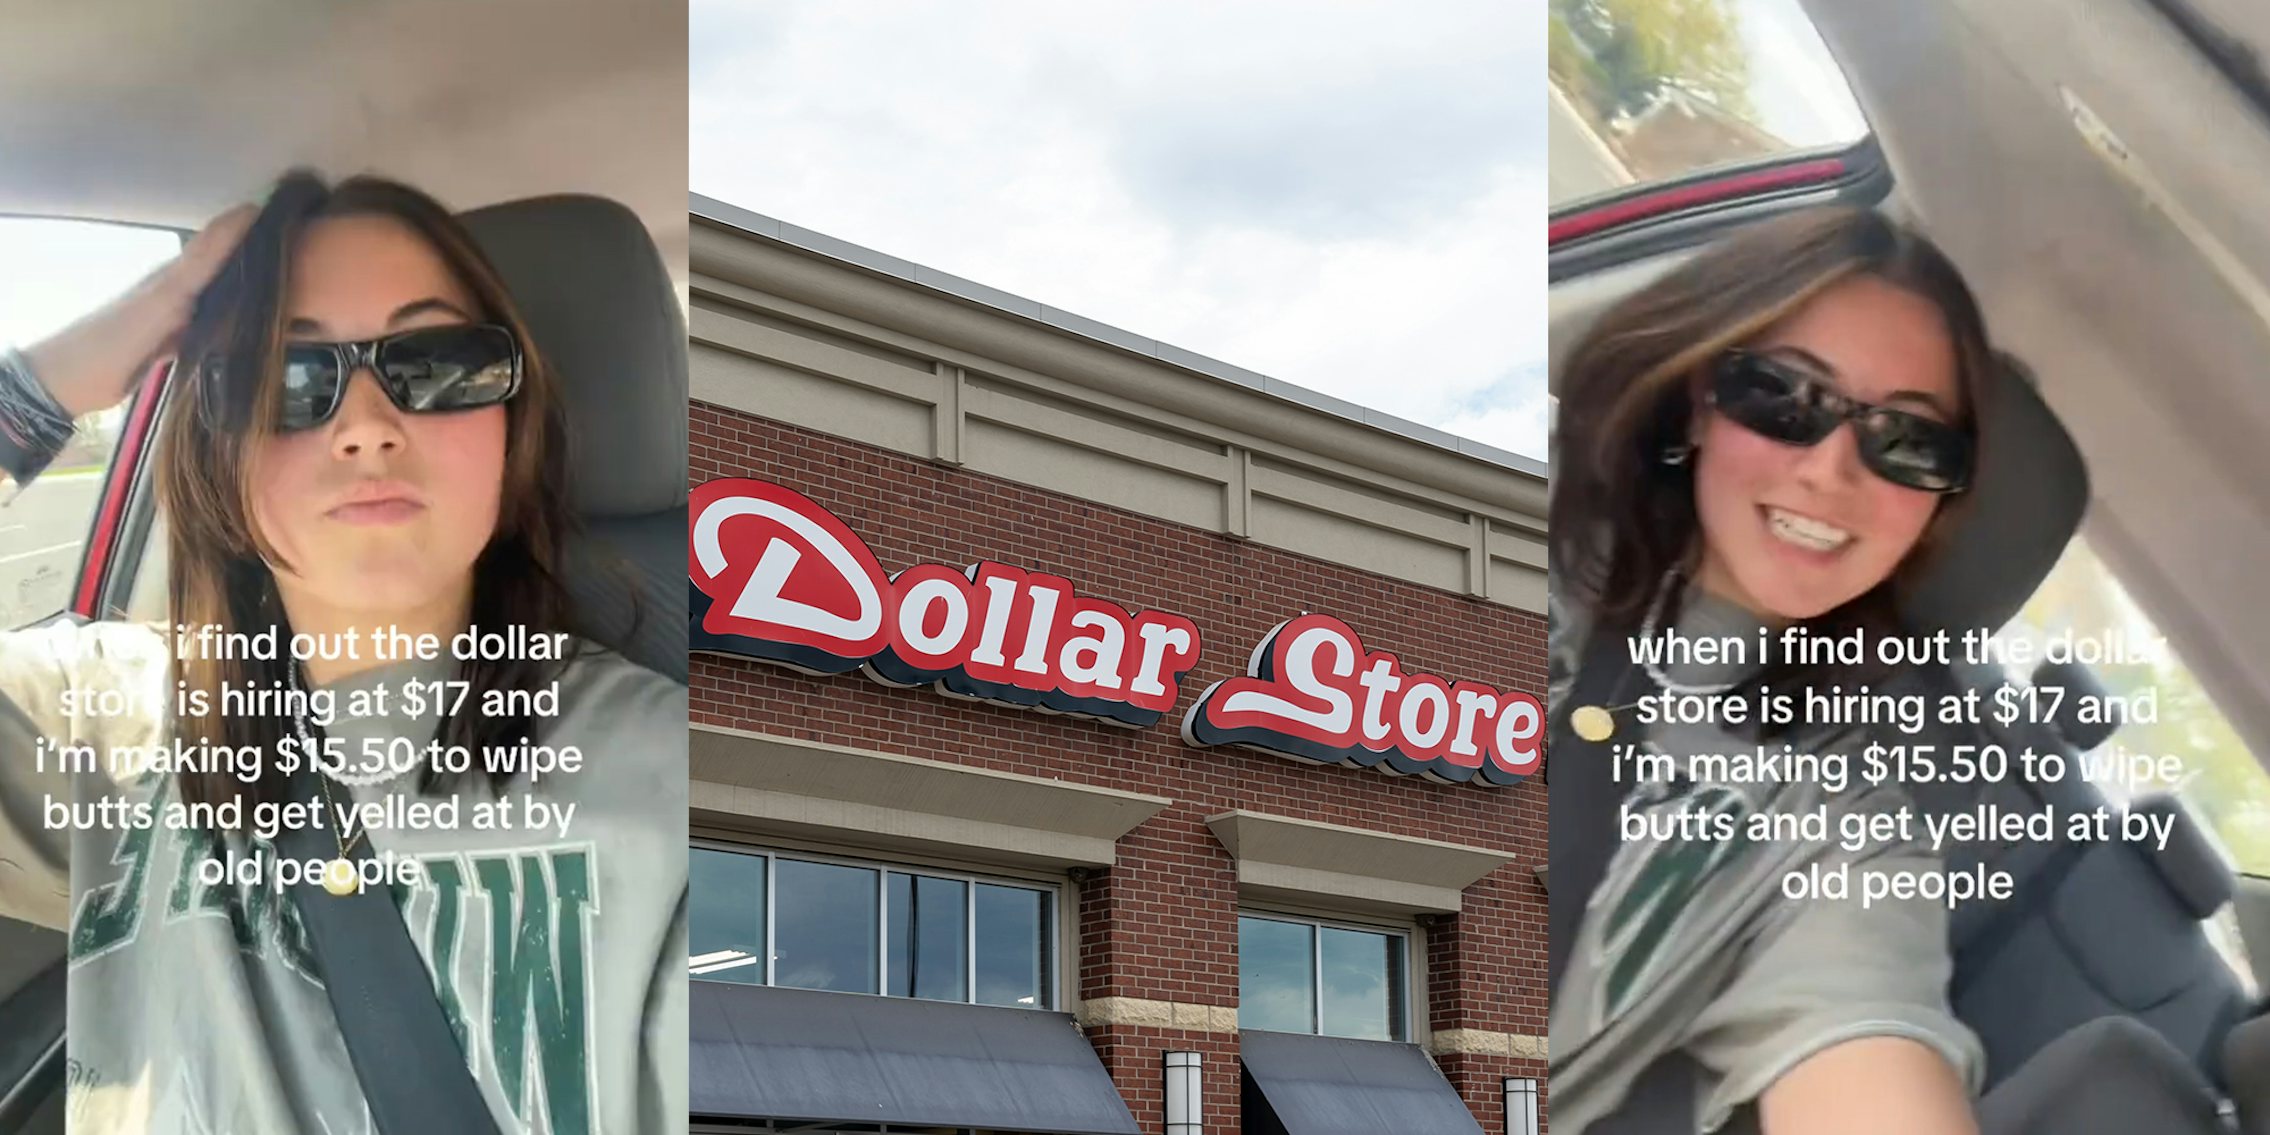 Worker contemplates quitting after finding out the Dollar Store is hiring at $17